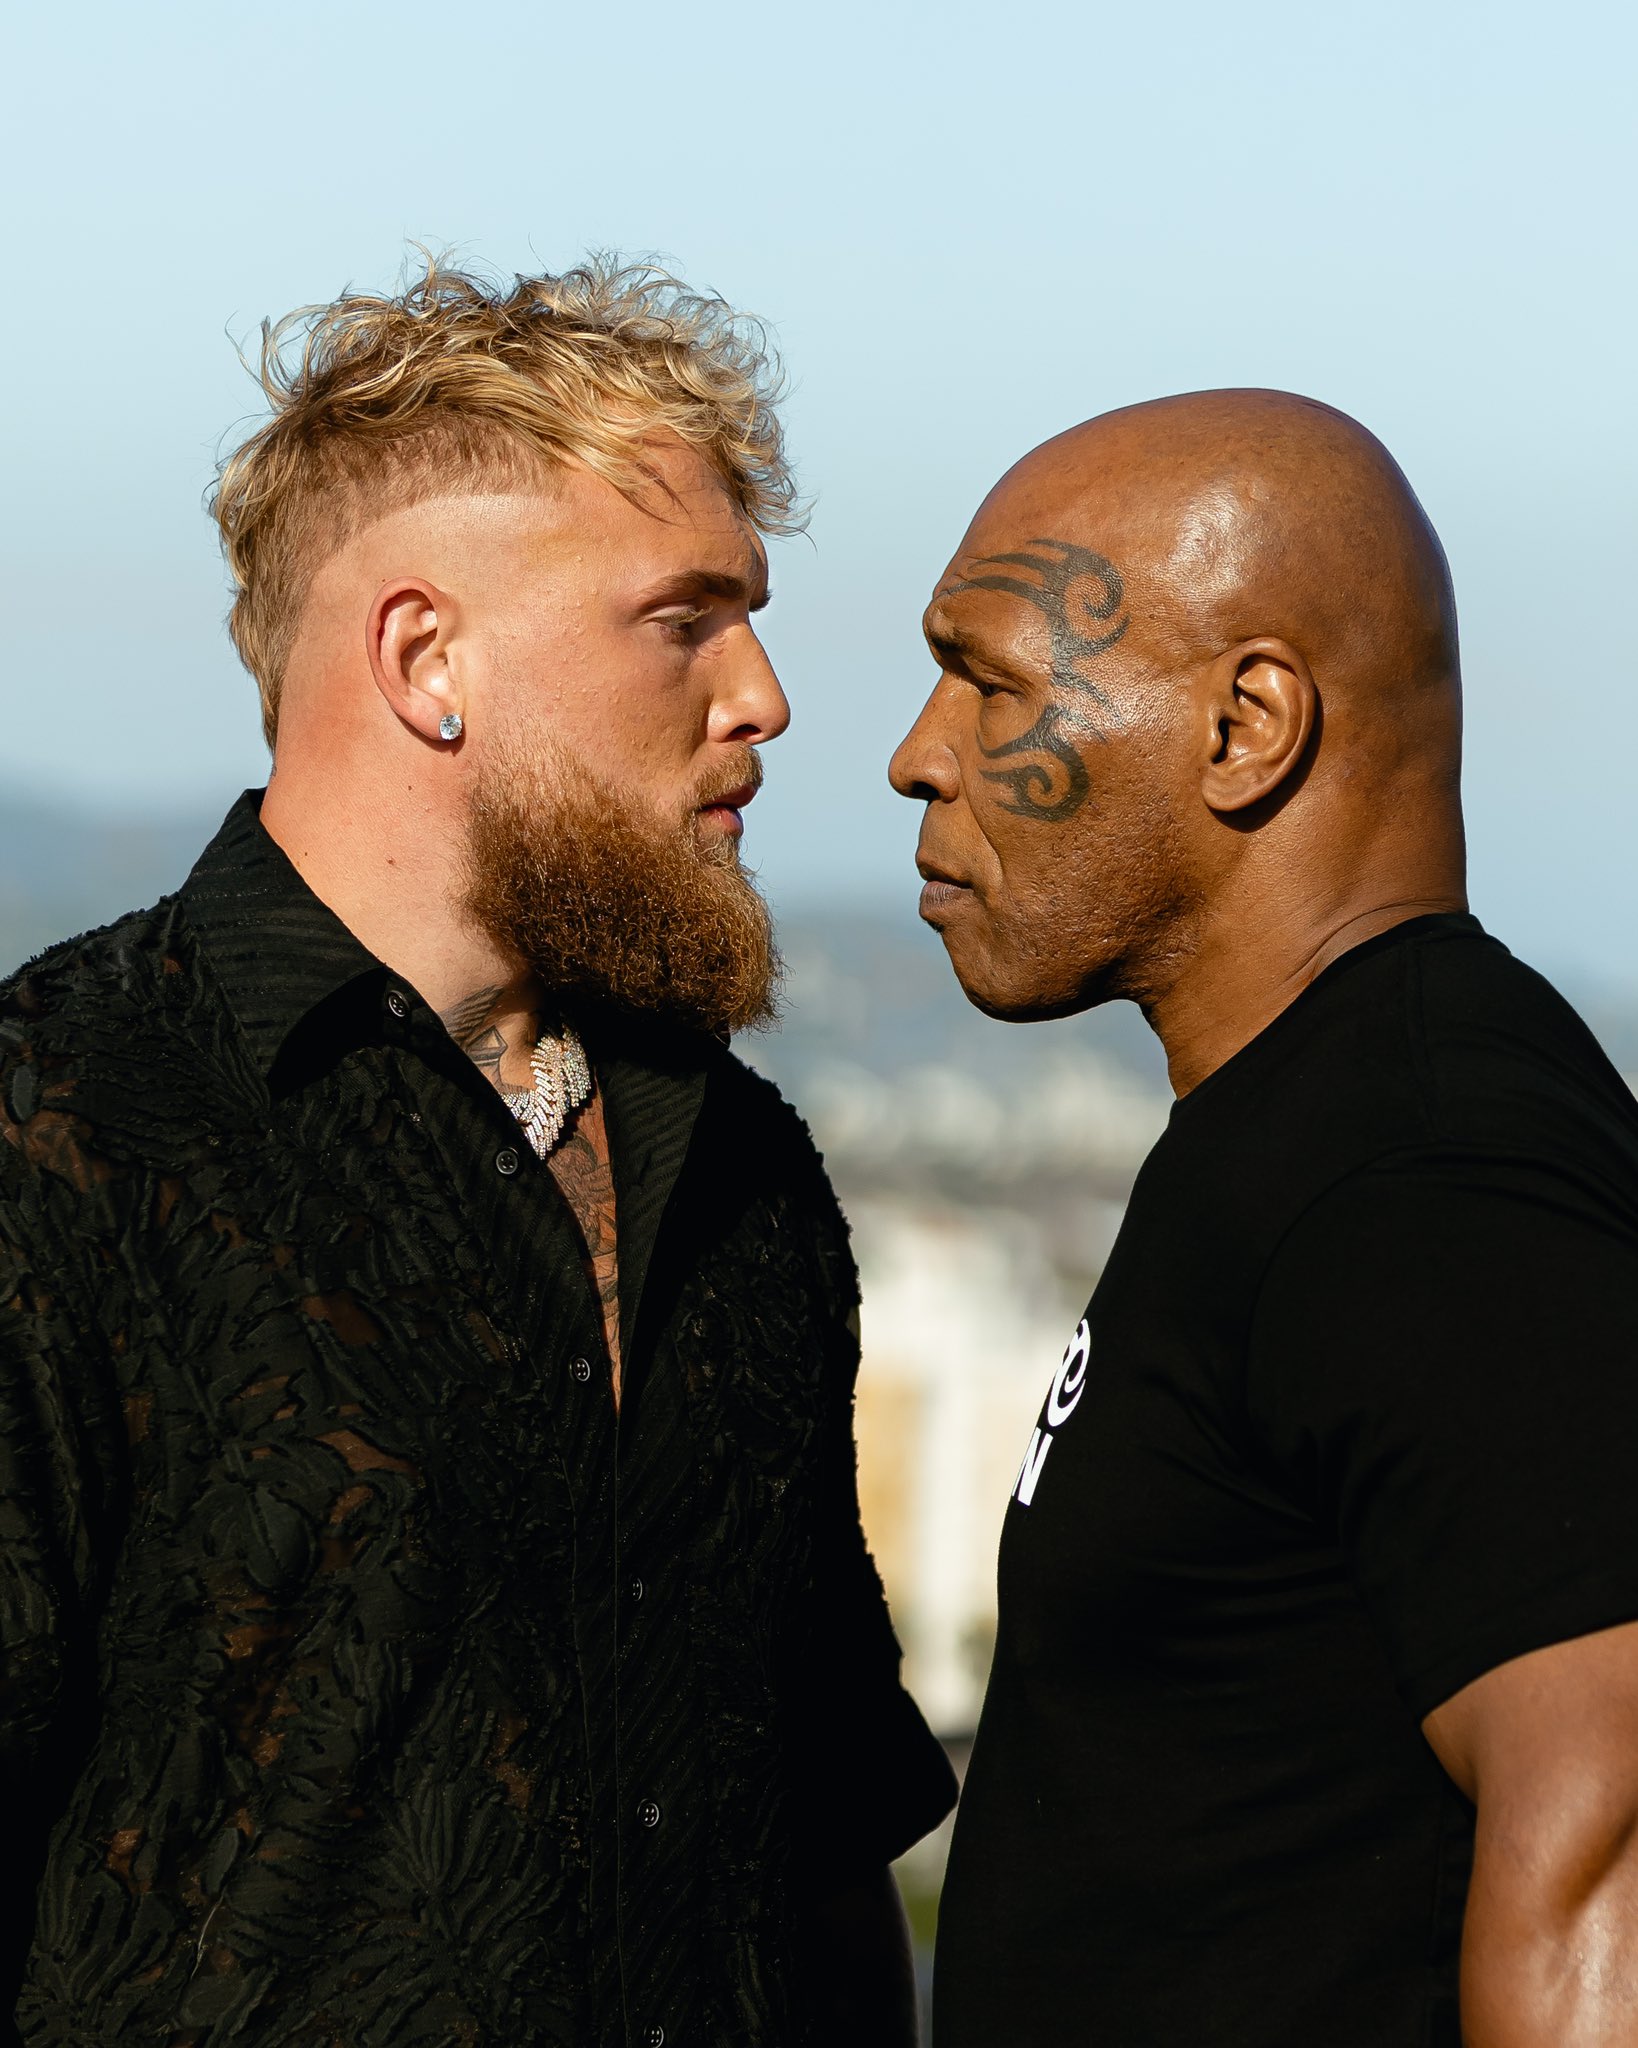 Jake Paul’s anticipated MMA debut faces delay amid huge Mike Tyson boxing fight